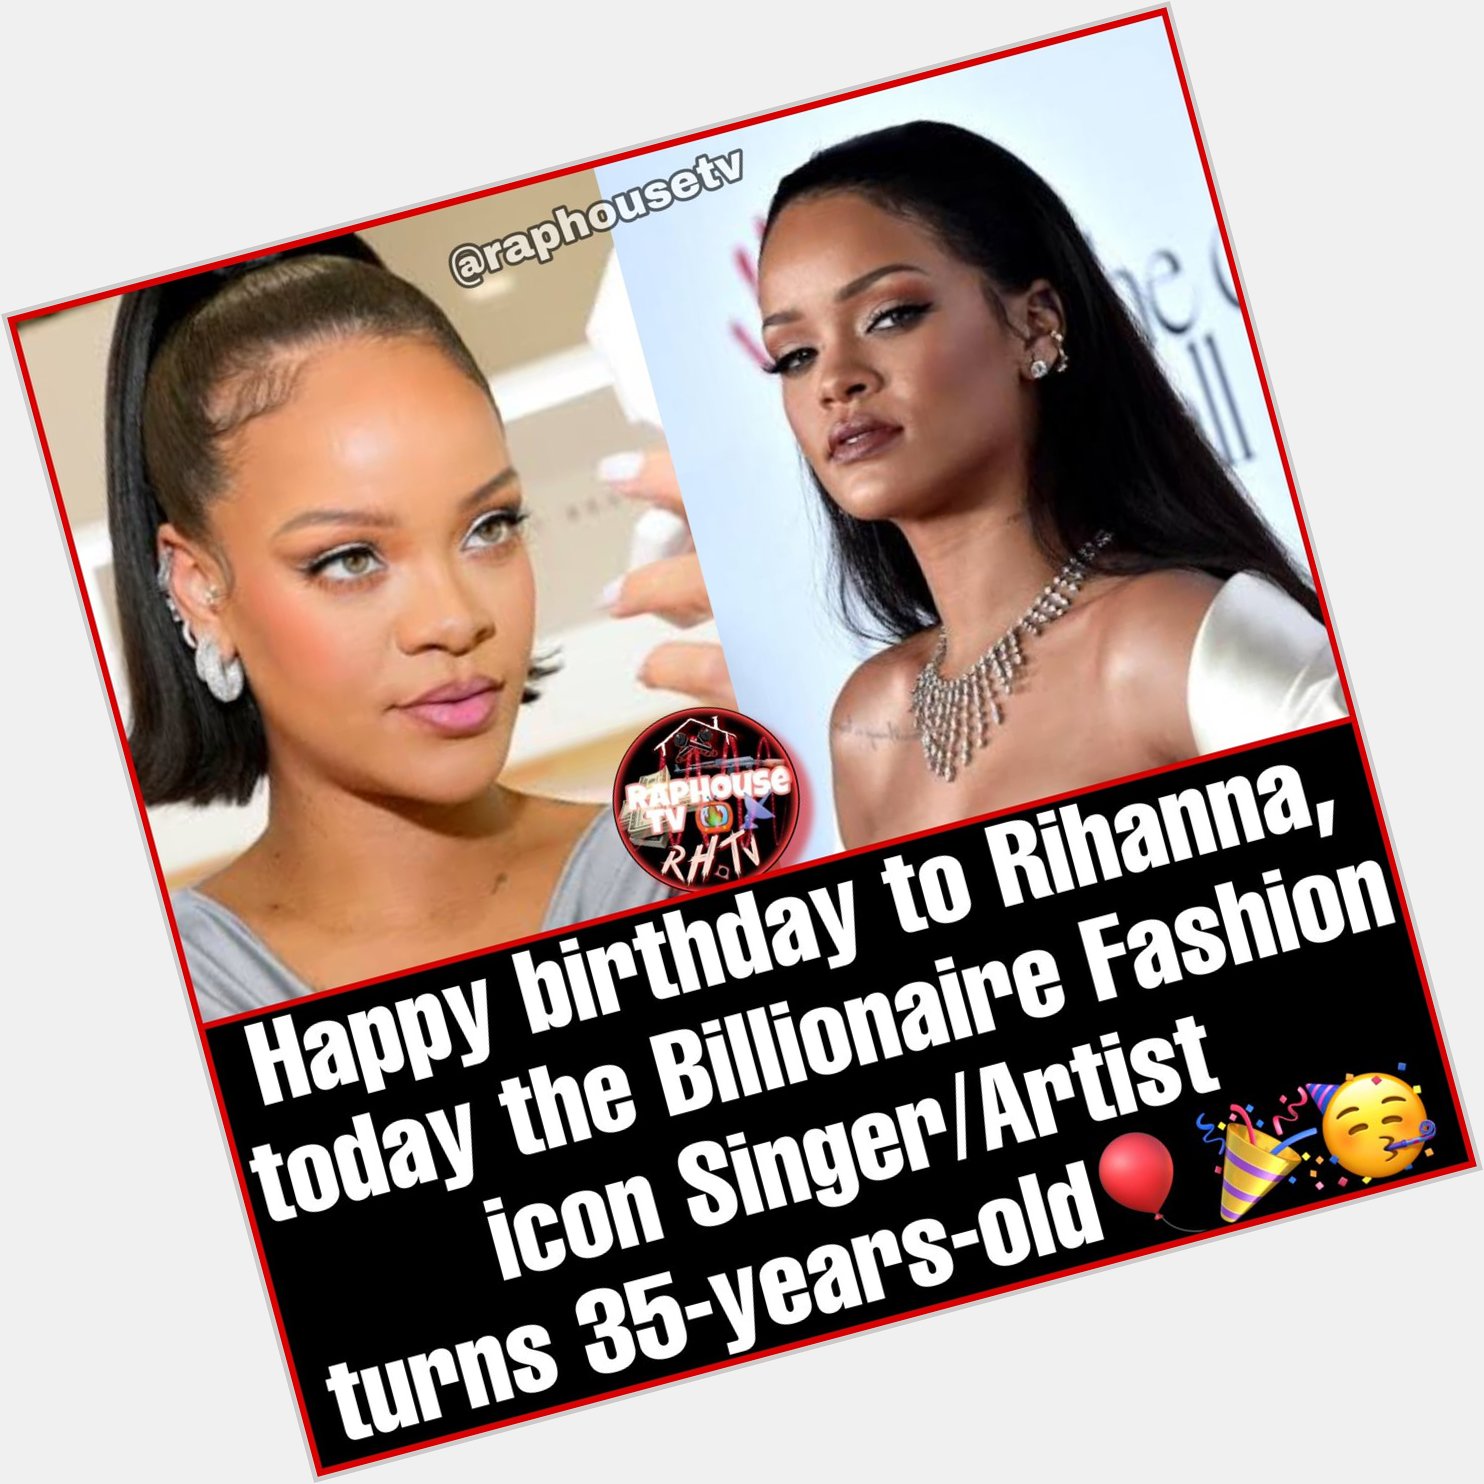 Happy birthday to Rihanna, today the Billionaire Fashion icon Singer/Artist
turns 35-years-old   